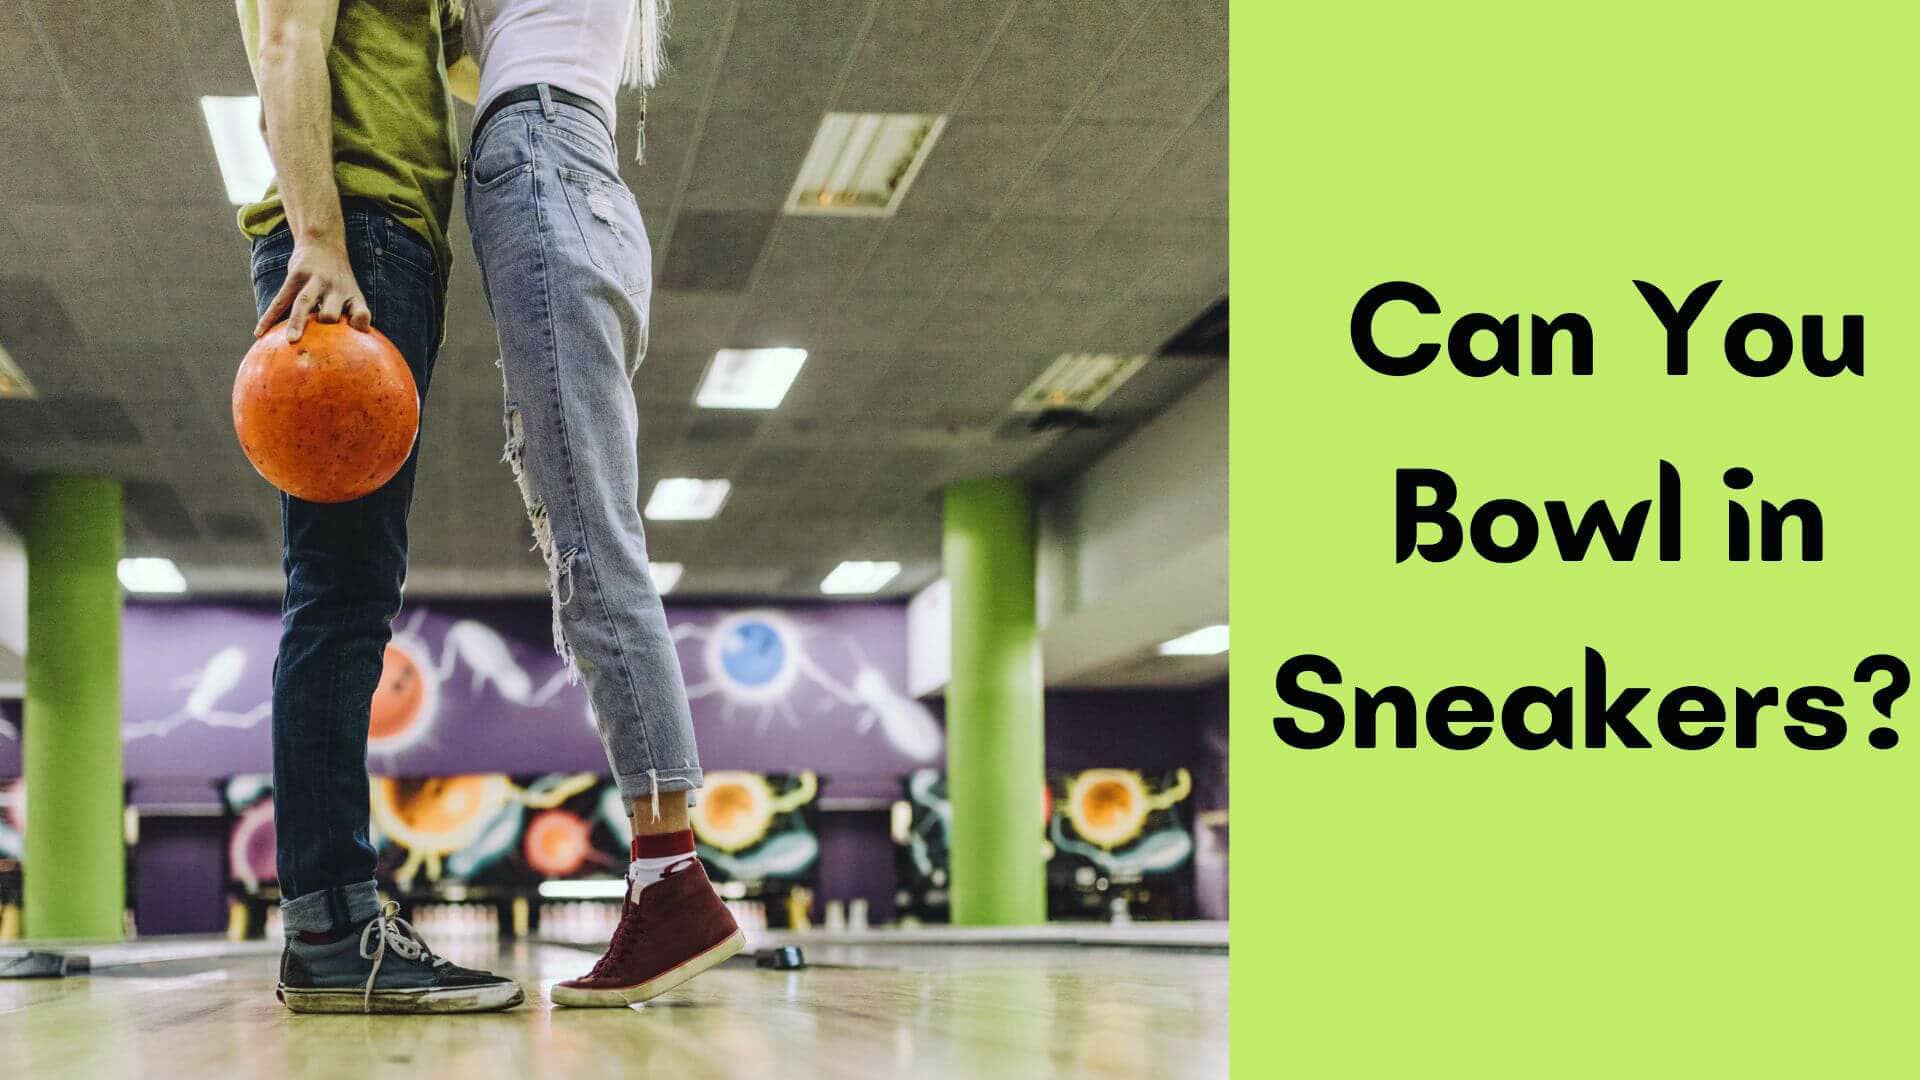 Can You Bowl in Sneakers?